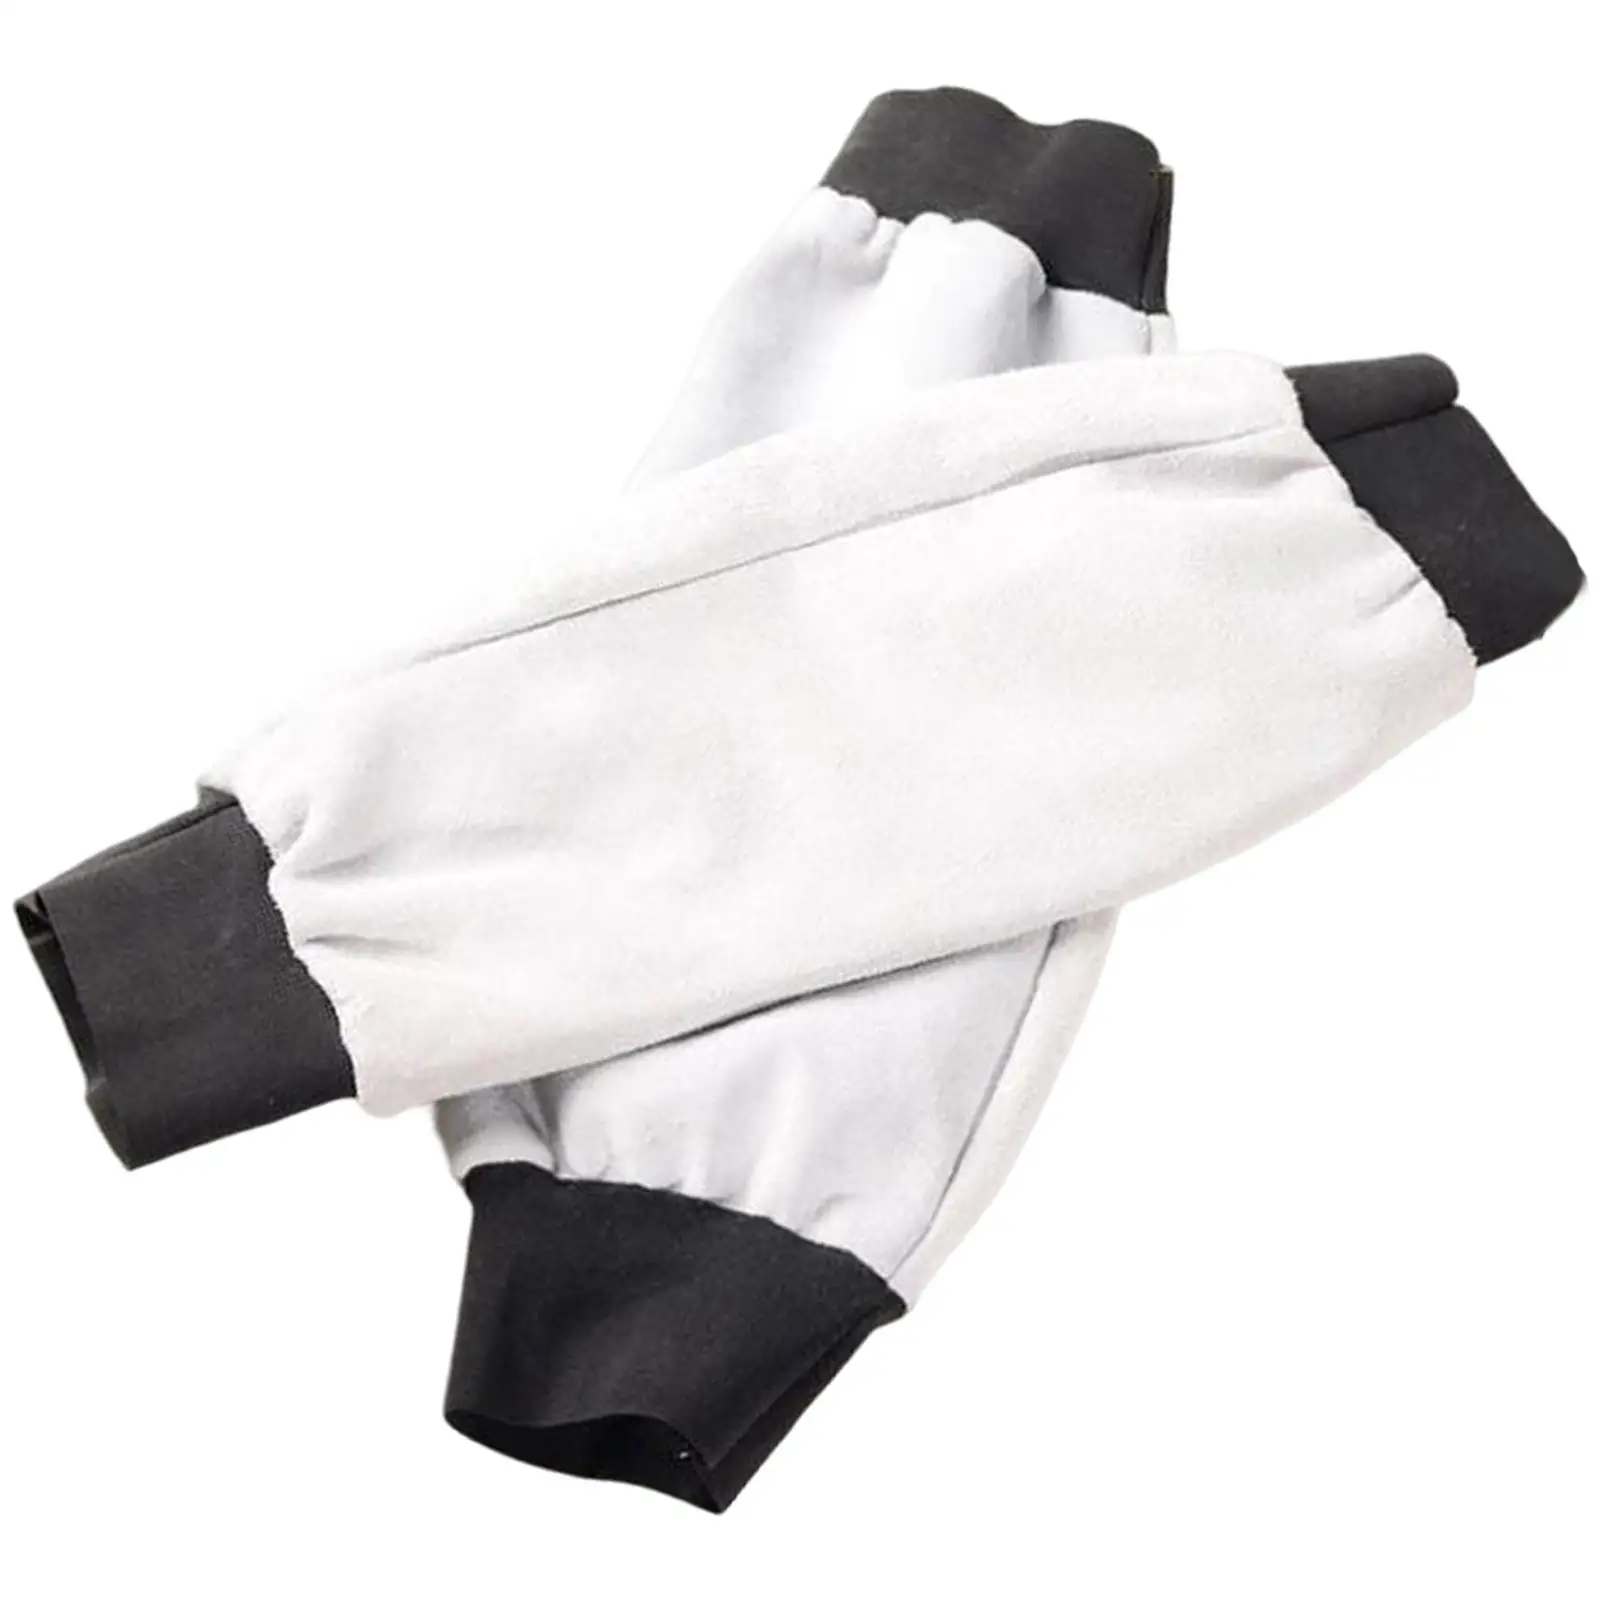 Welding Sleeves Heat resistant with elastic Arm protection for work